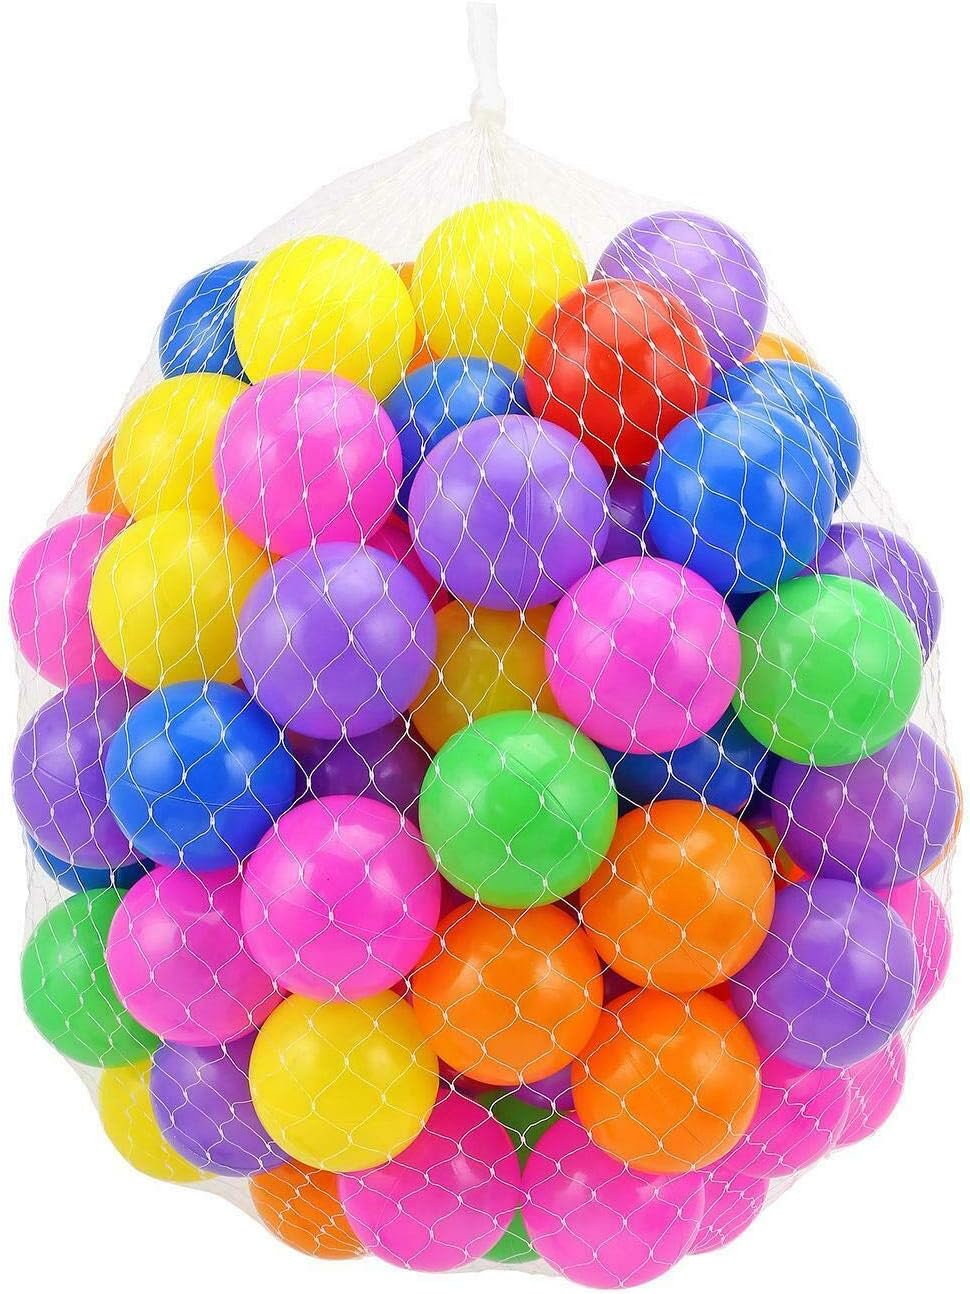 100 x Multi-Color Kids Baby Child Soft Play Fan Balls Toy for Ball Pit Swim Pool 0758